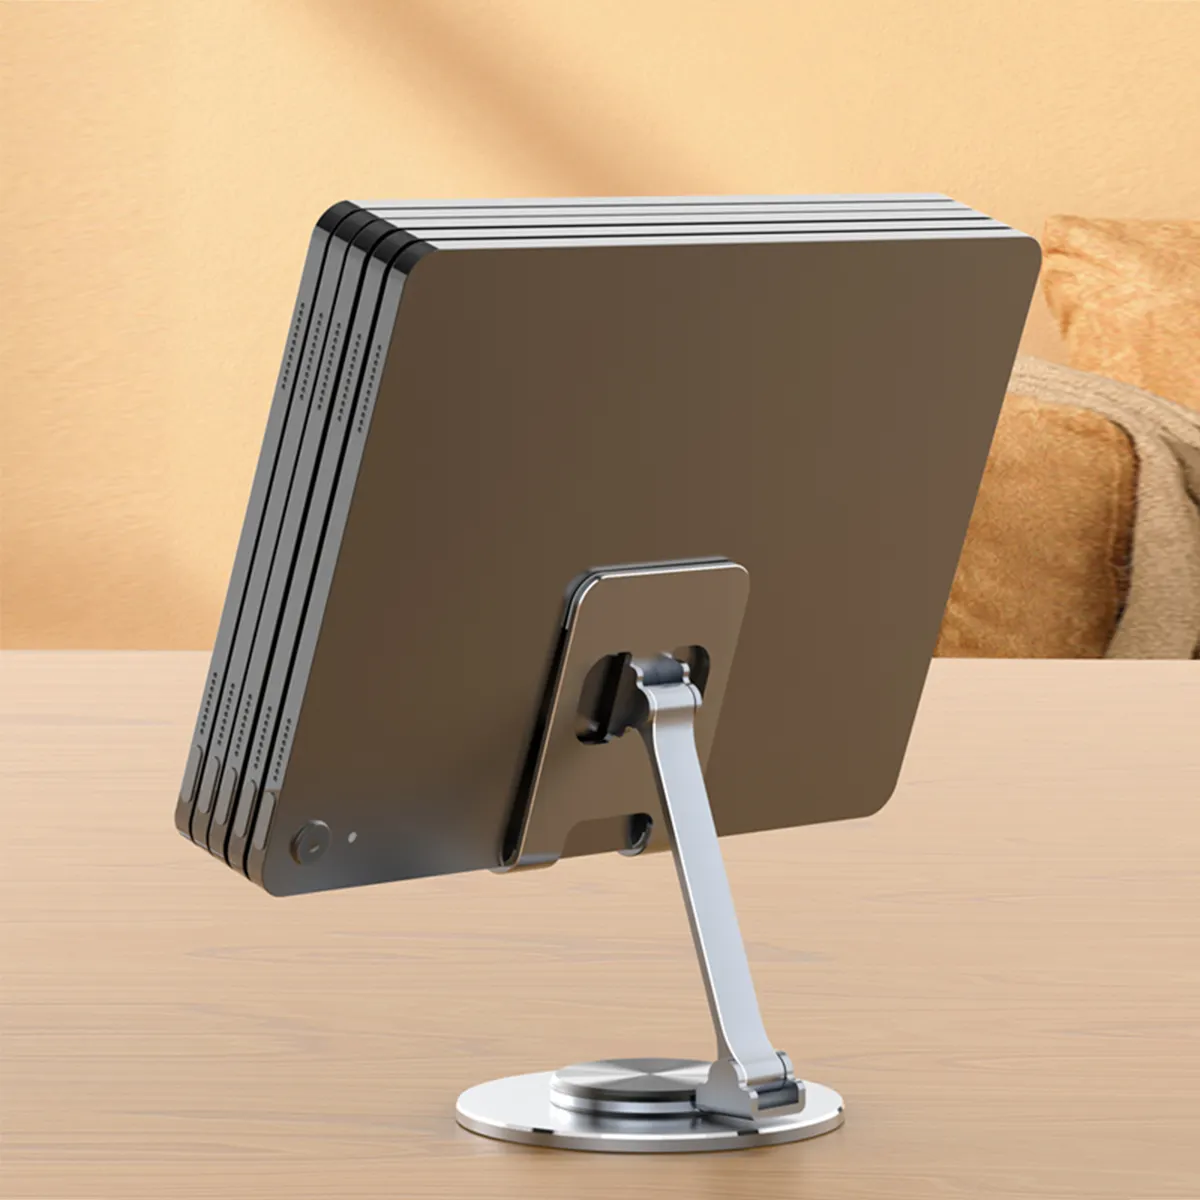 New Coming High Quality Foldable 360 Rotation Mobile Phone Holder Stand Aluminum Alloy Desktop Tablet Holder For Ipad